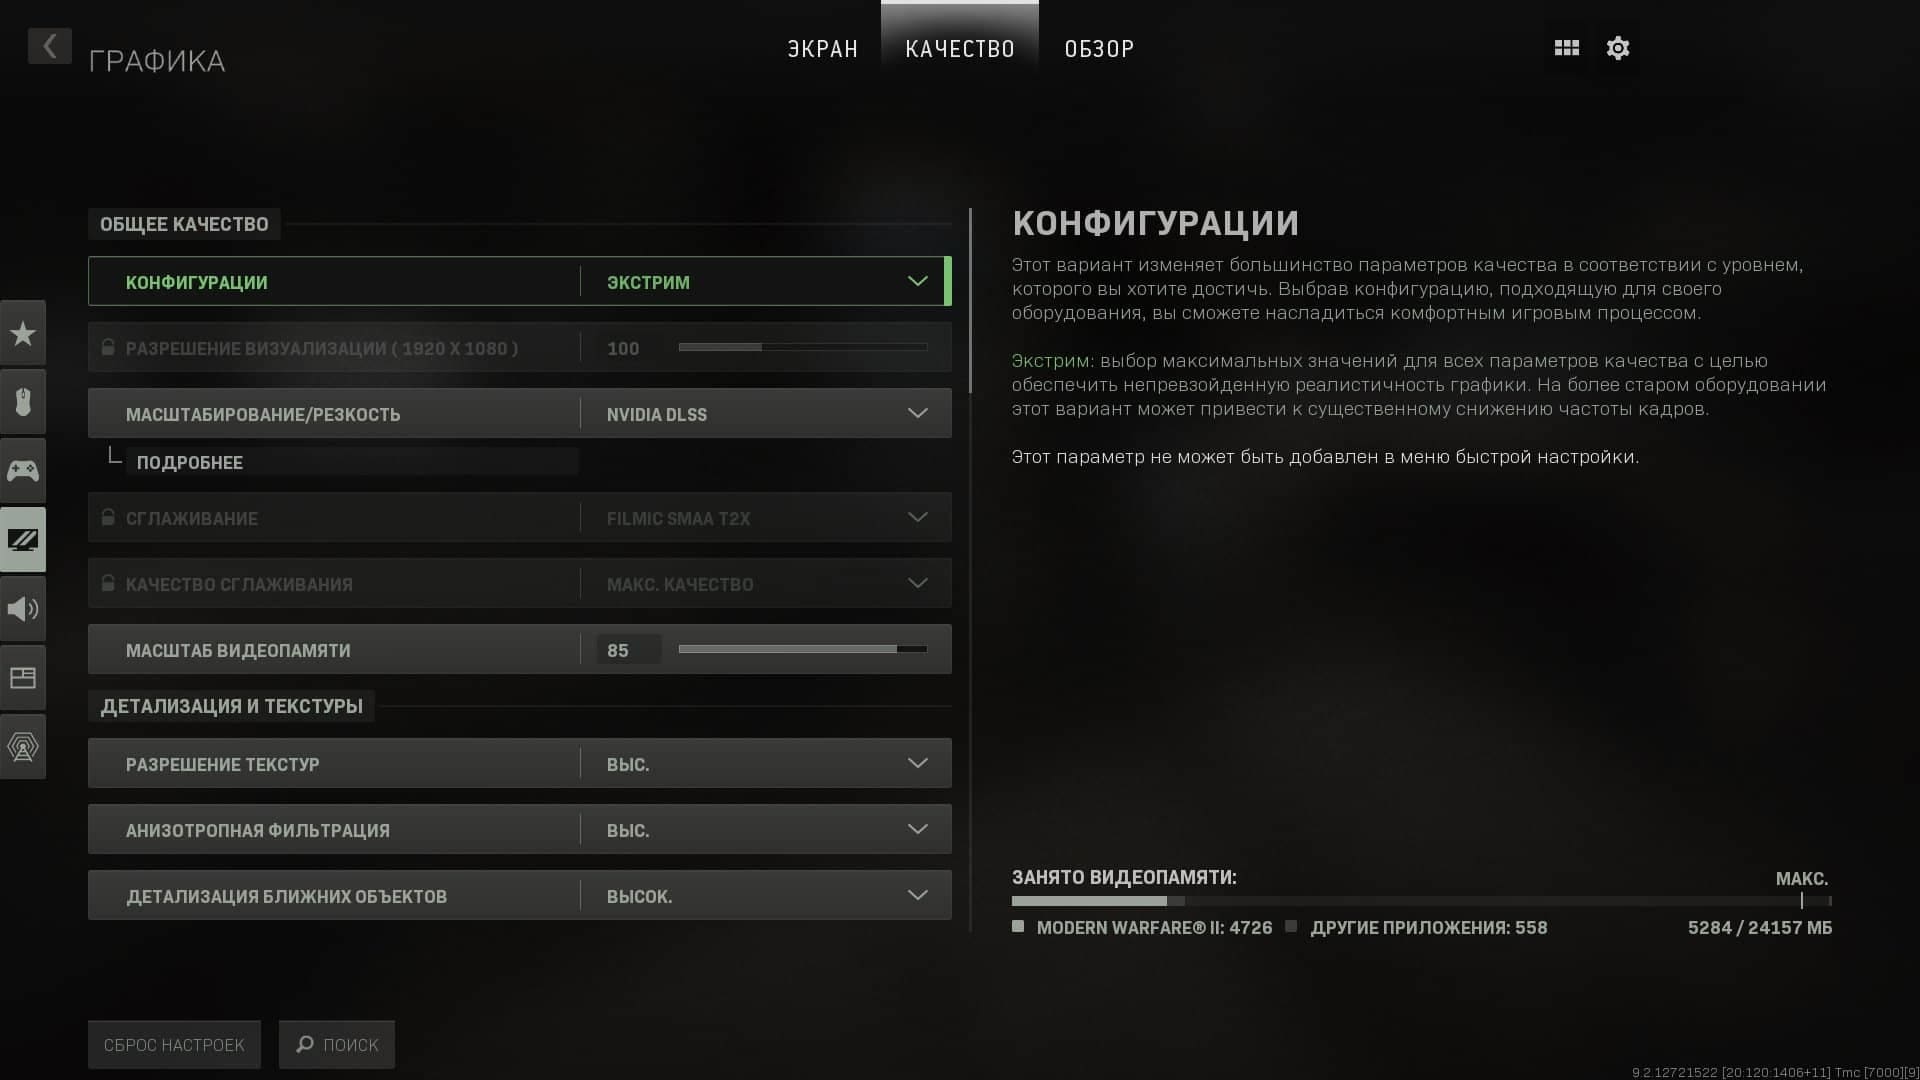 Please make sure plusmaster client is updated and running call of duty фото 116